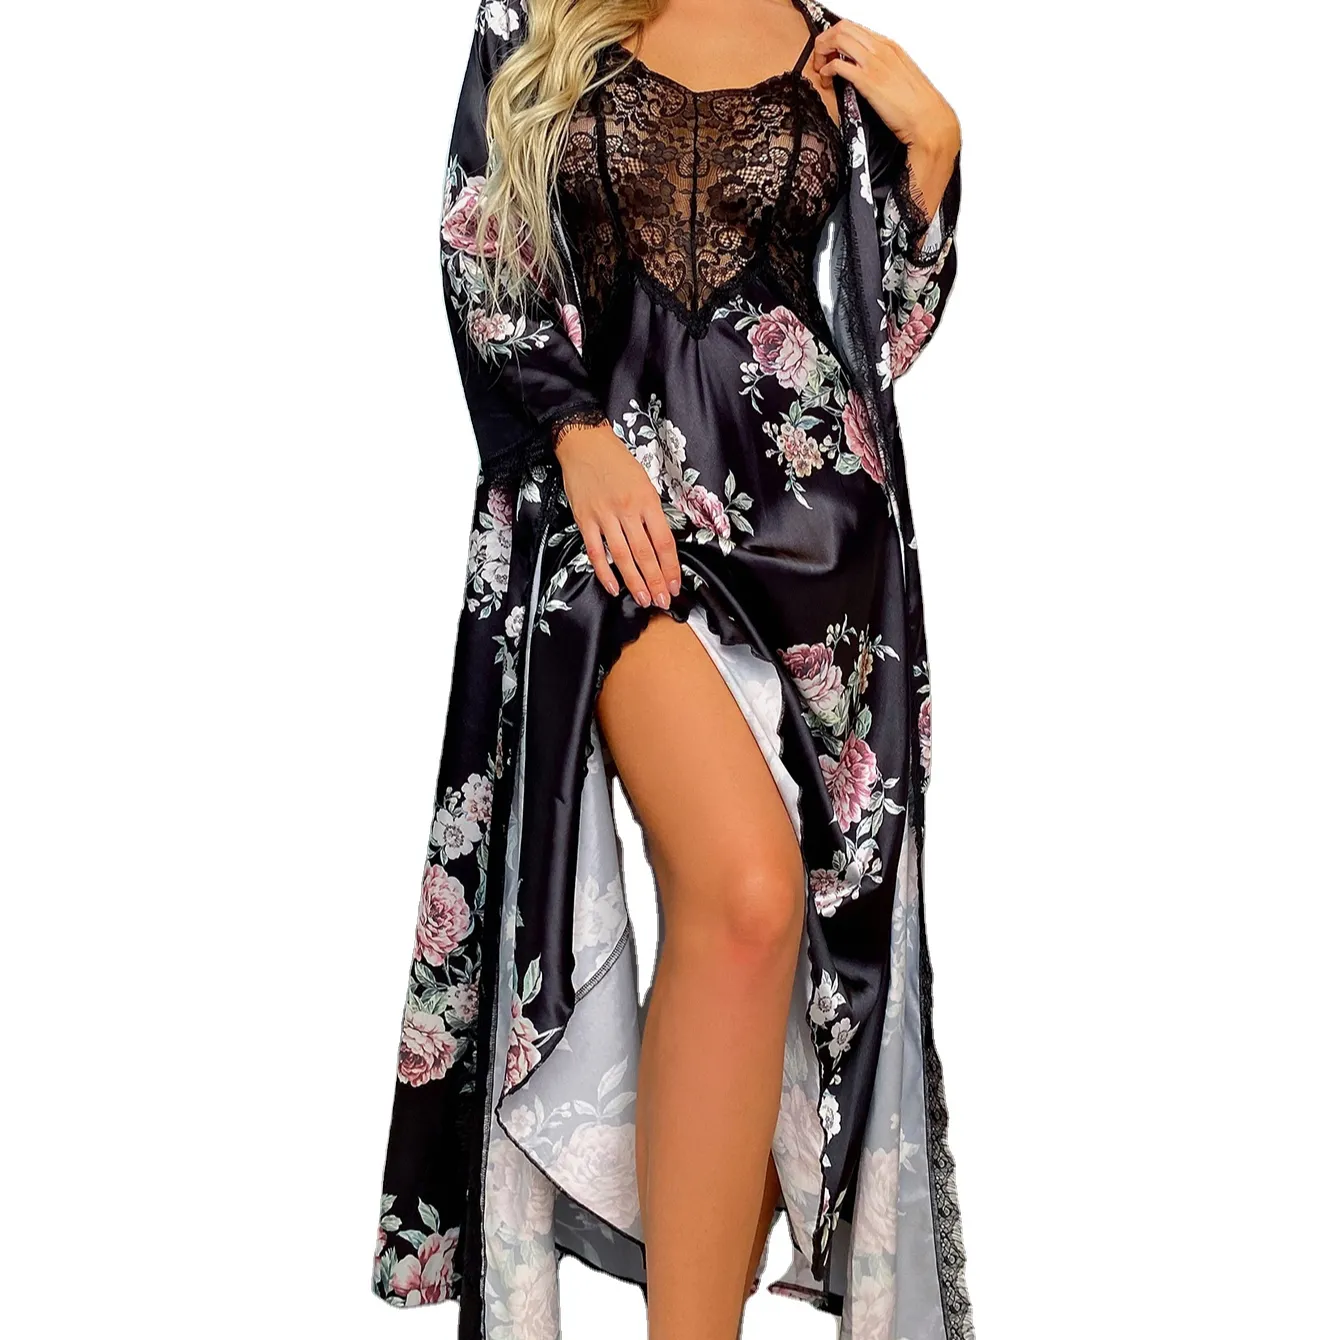 Bossman female lace lingerie long sleeve bathrobes with robe harness skirt and underwear